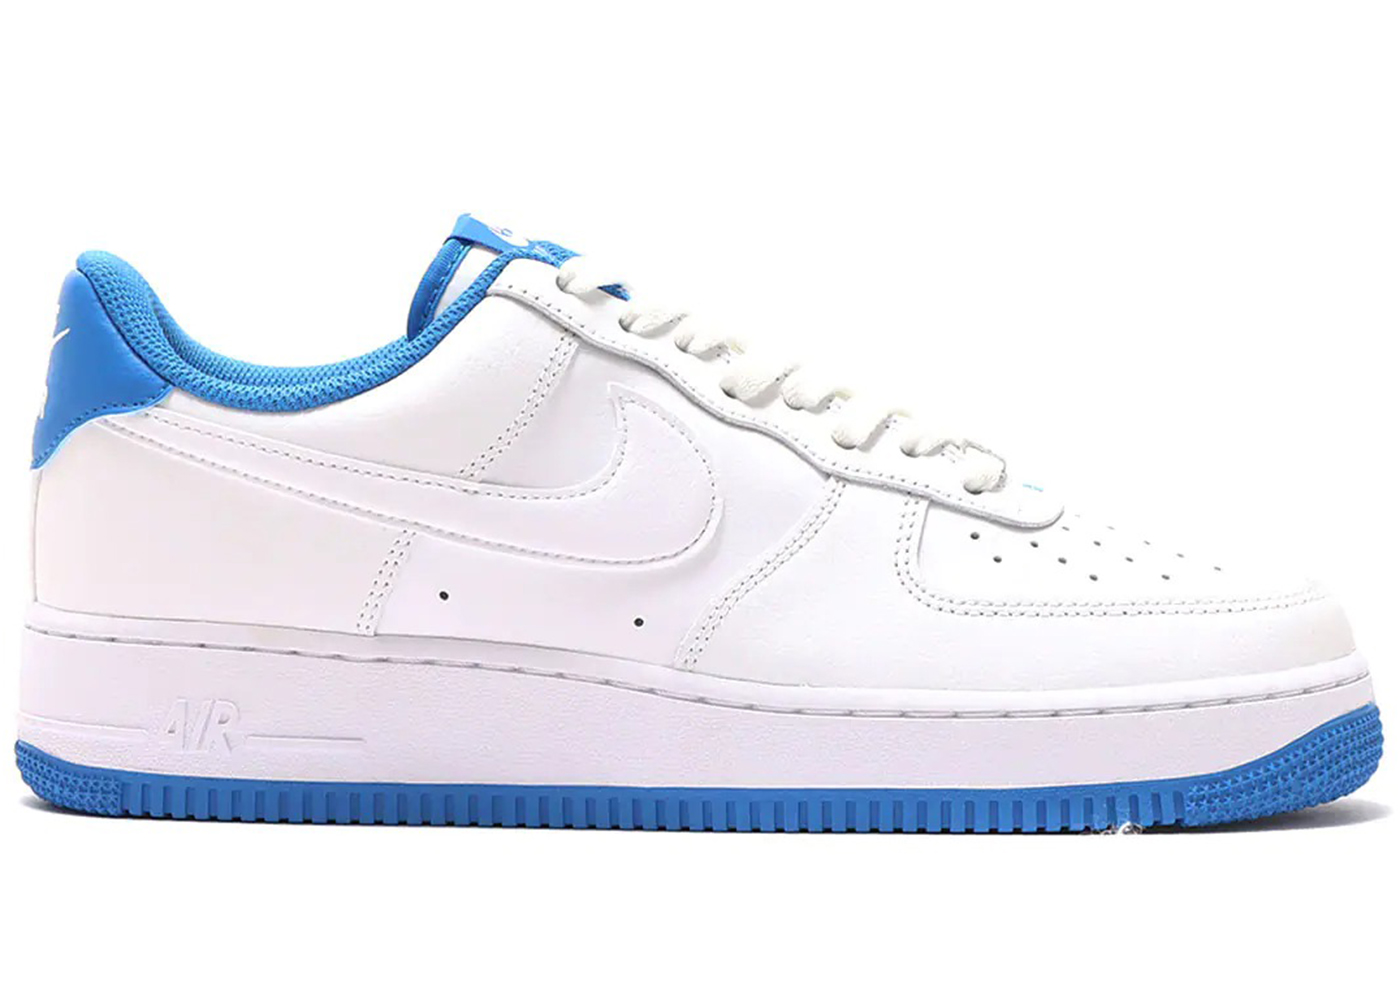 Nike Air Force 1 Low '07 White Light Photo Blue